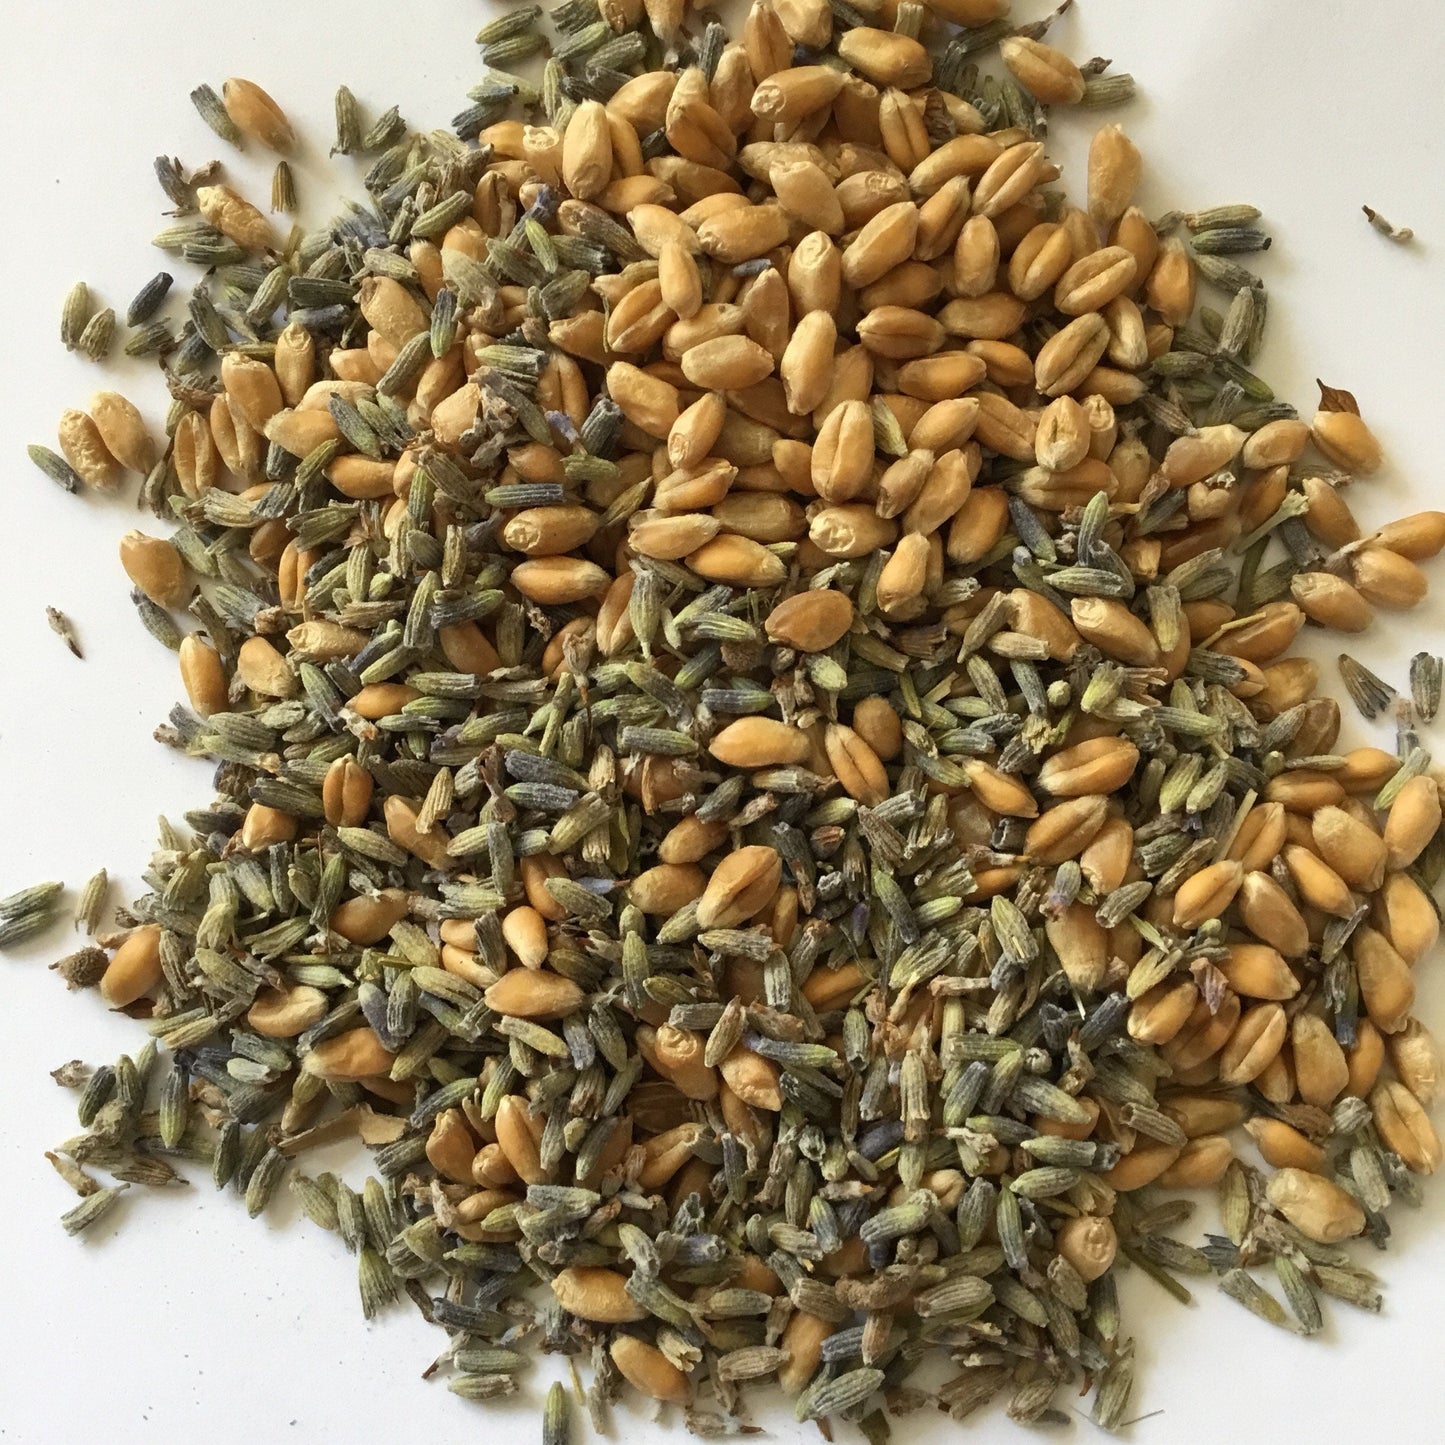 Ingredients for Lavender Wheat Bag. Aromatherapy heat pack in mystic wood print cotton fabric